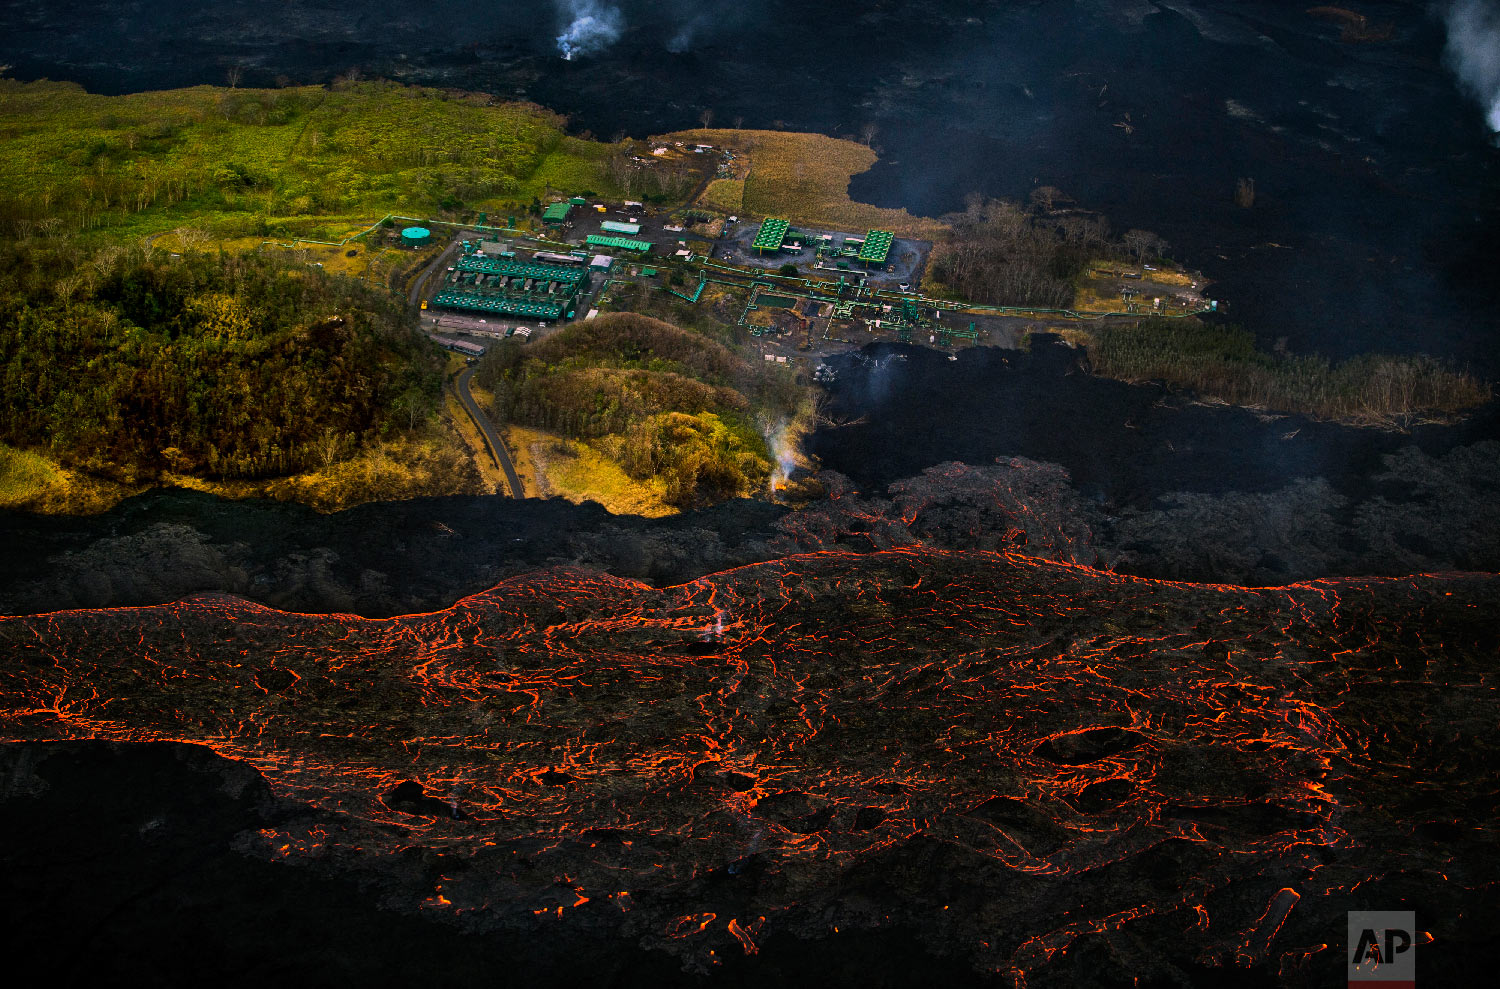  Lava from the Kilauea volcano flows near the Puna Geothermal Venture power plant in Pahoa, Hawaii, on June 10, 2018. (AP Photo/L.E. Baskow) 